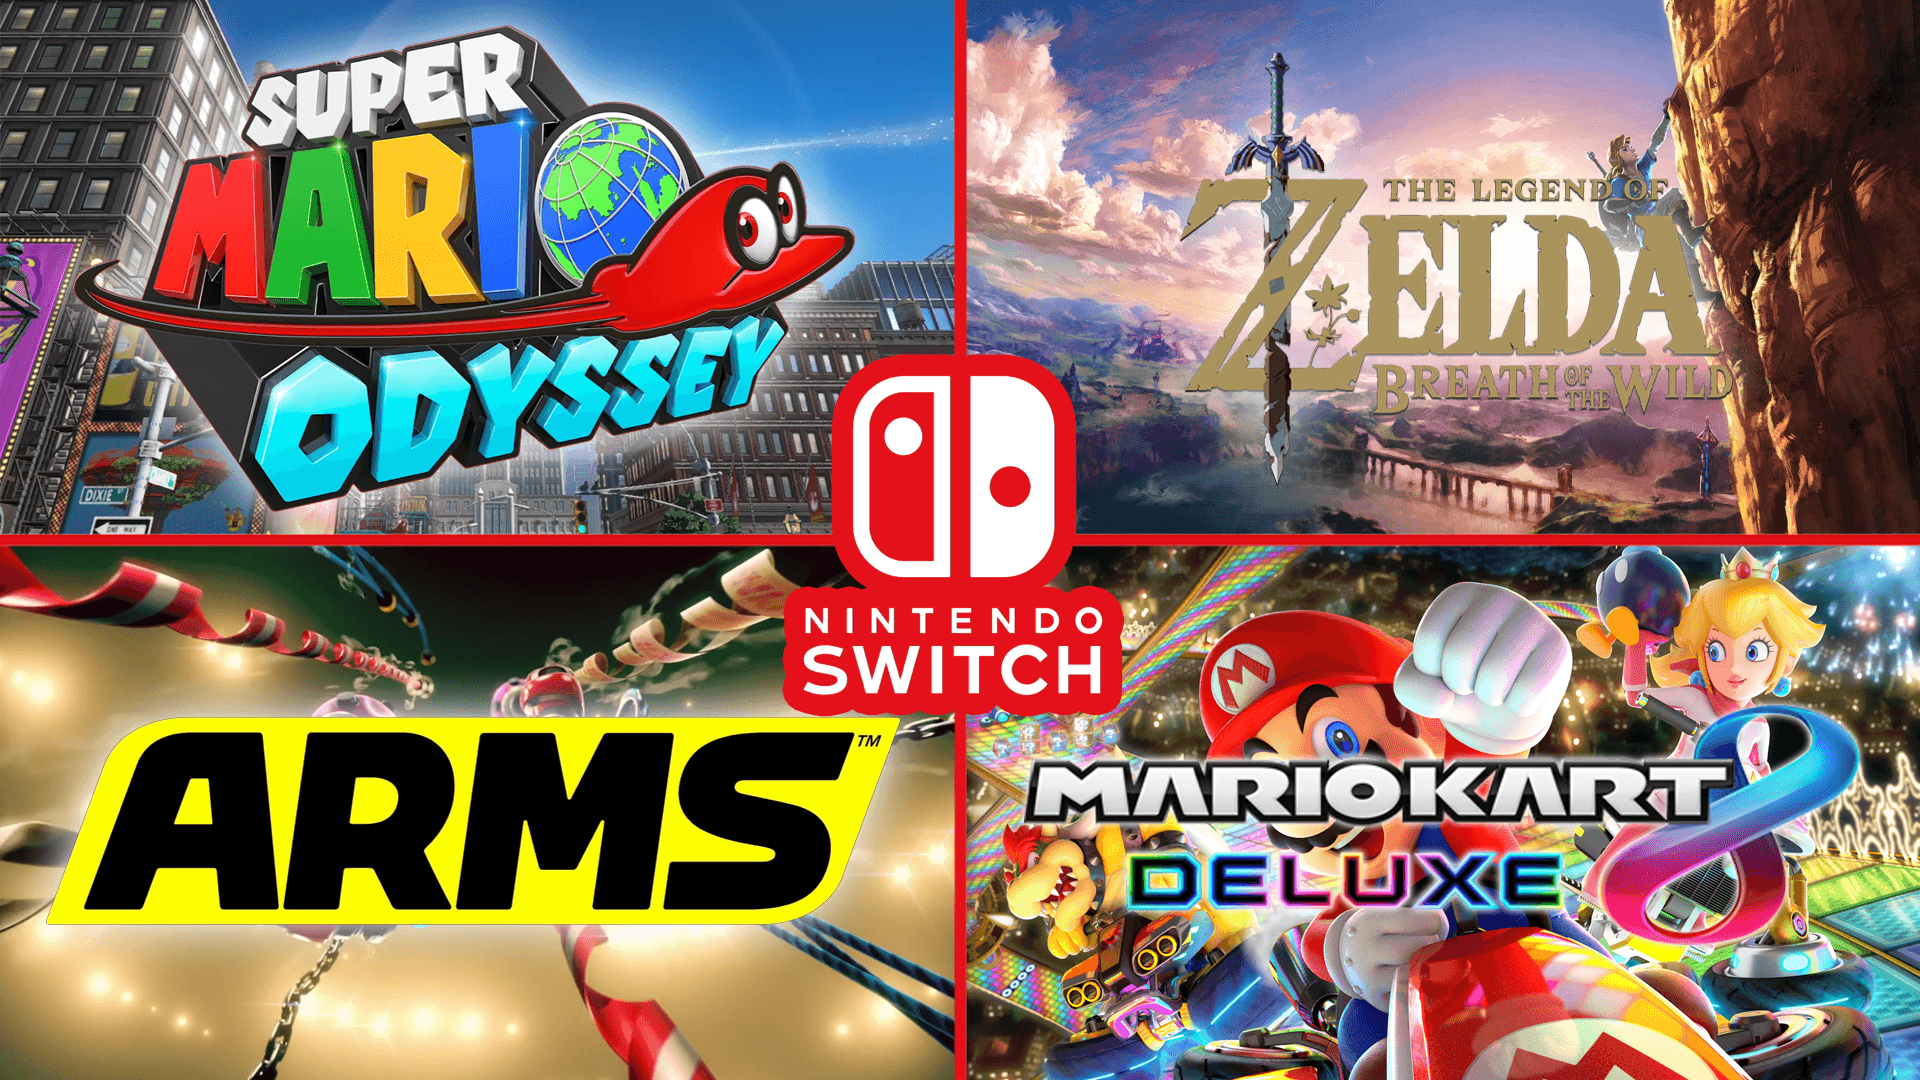 I made a wallpaper for some Nintendo Switch games I'm excited for